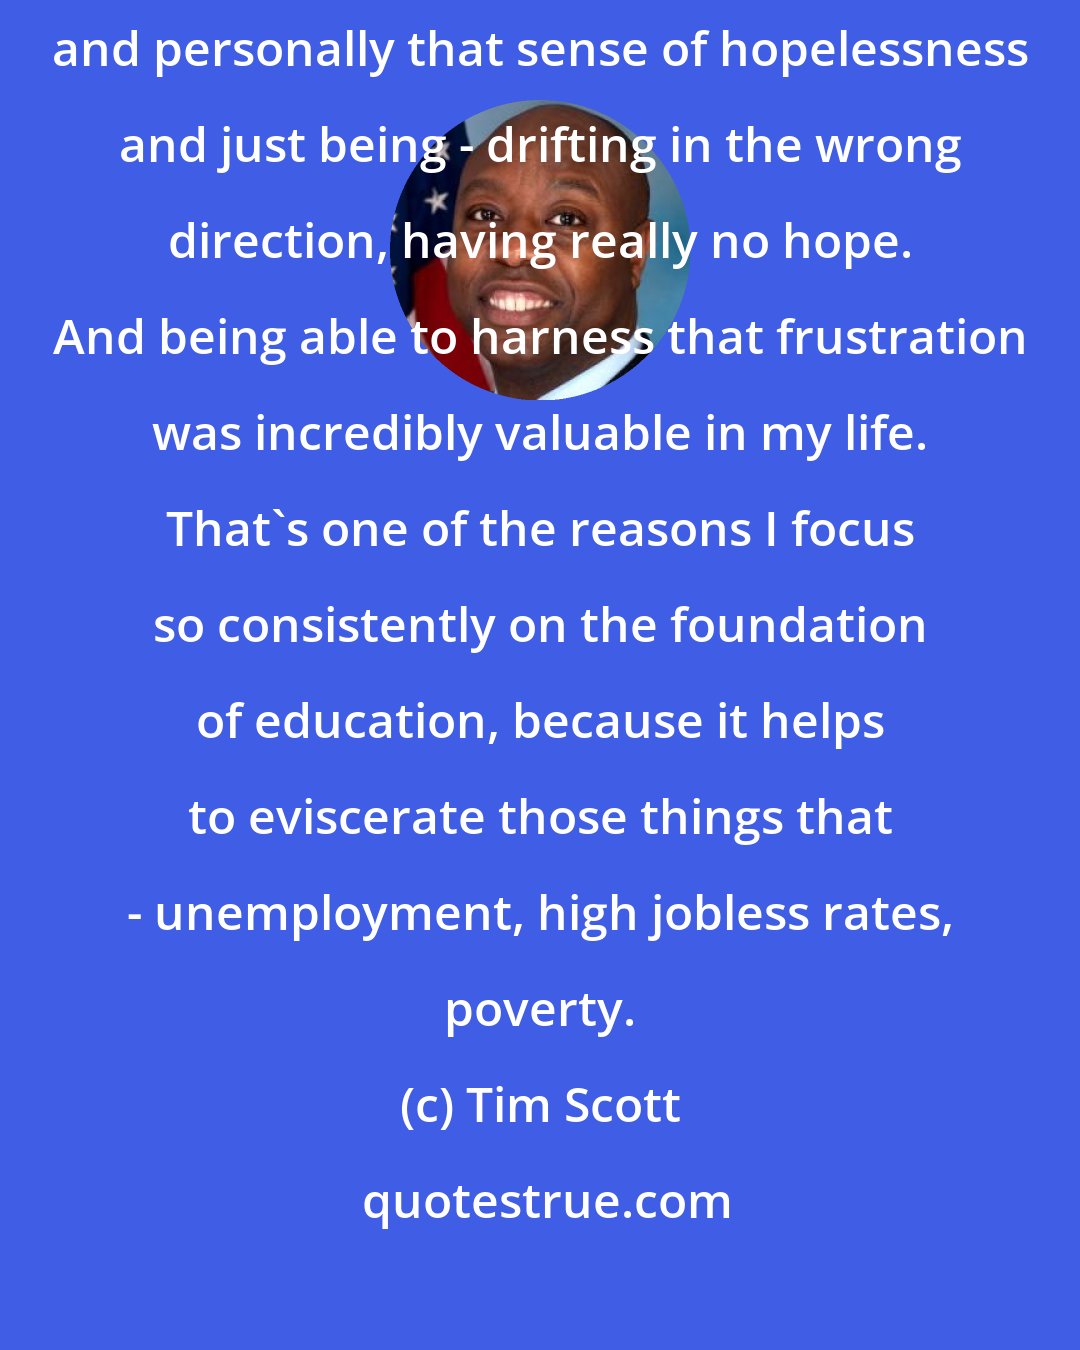 Tim Scott: As a kid who failed out of high school as a freshman, I know firsthand and personally that sense of hopelessness and just being - drifting in the wrong direction, having really no hope. And being able to harness that frustration was incredibly valuable in my life. That's one of the reasons I focus so consistently on the foundation of education, because it helps to eviscerate those things that - unemployment, high jobless rates, poverty.